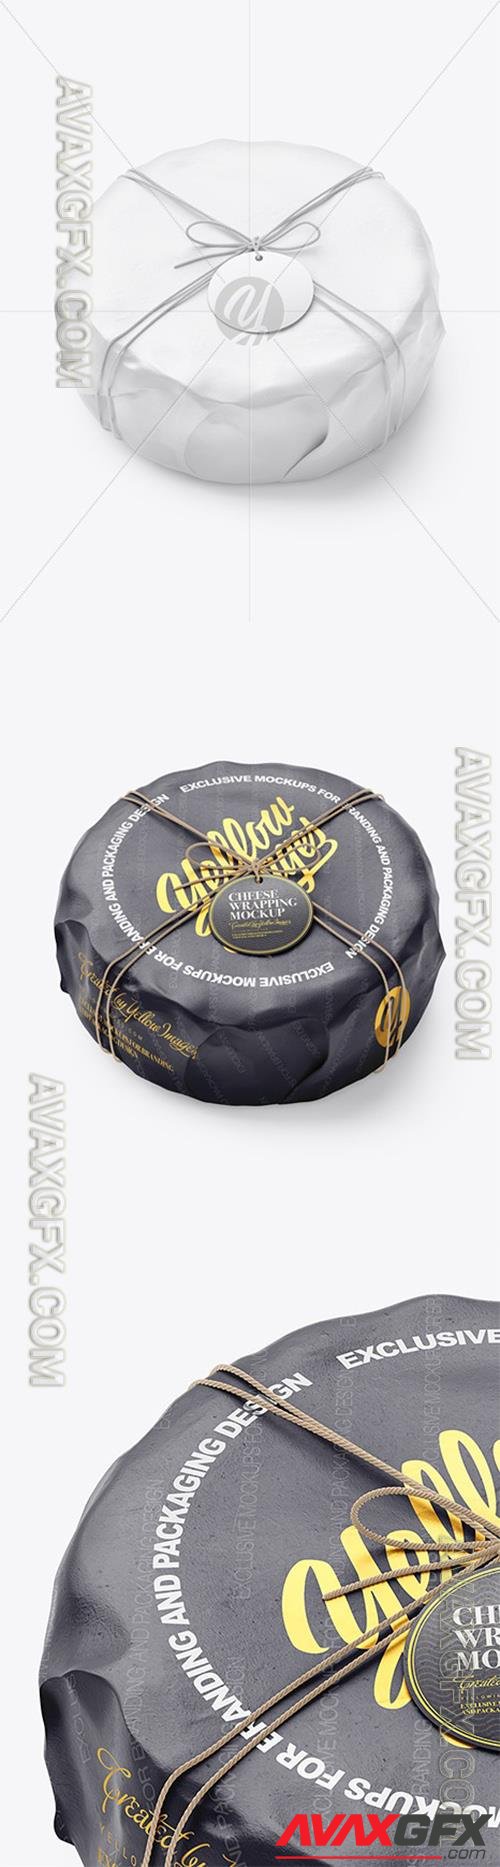 Cheese Wheel Wrapped In Paper Mockup 97813 TIF